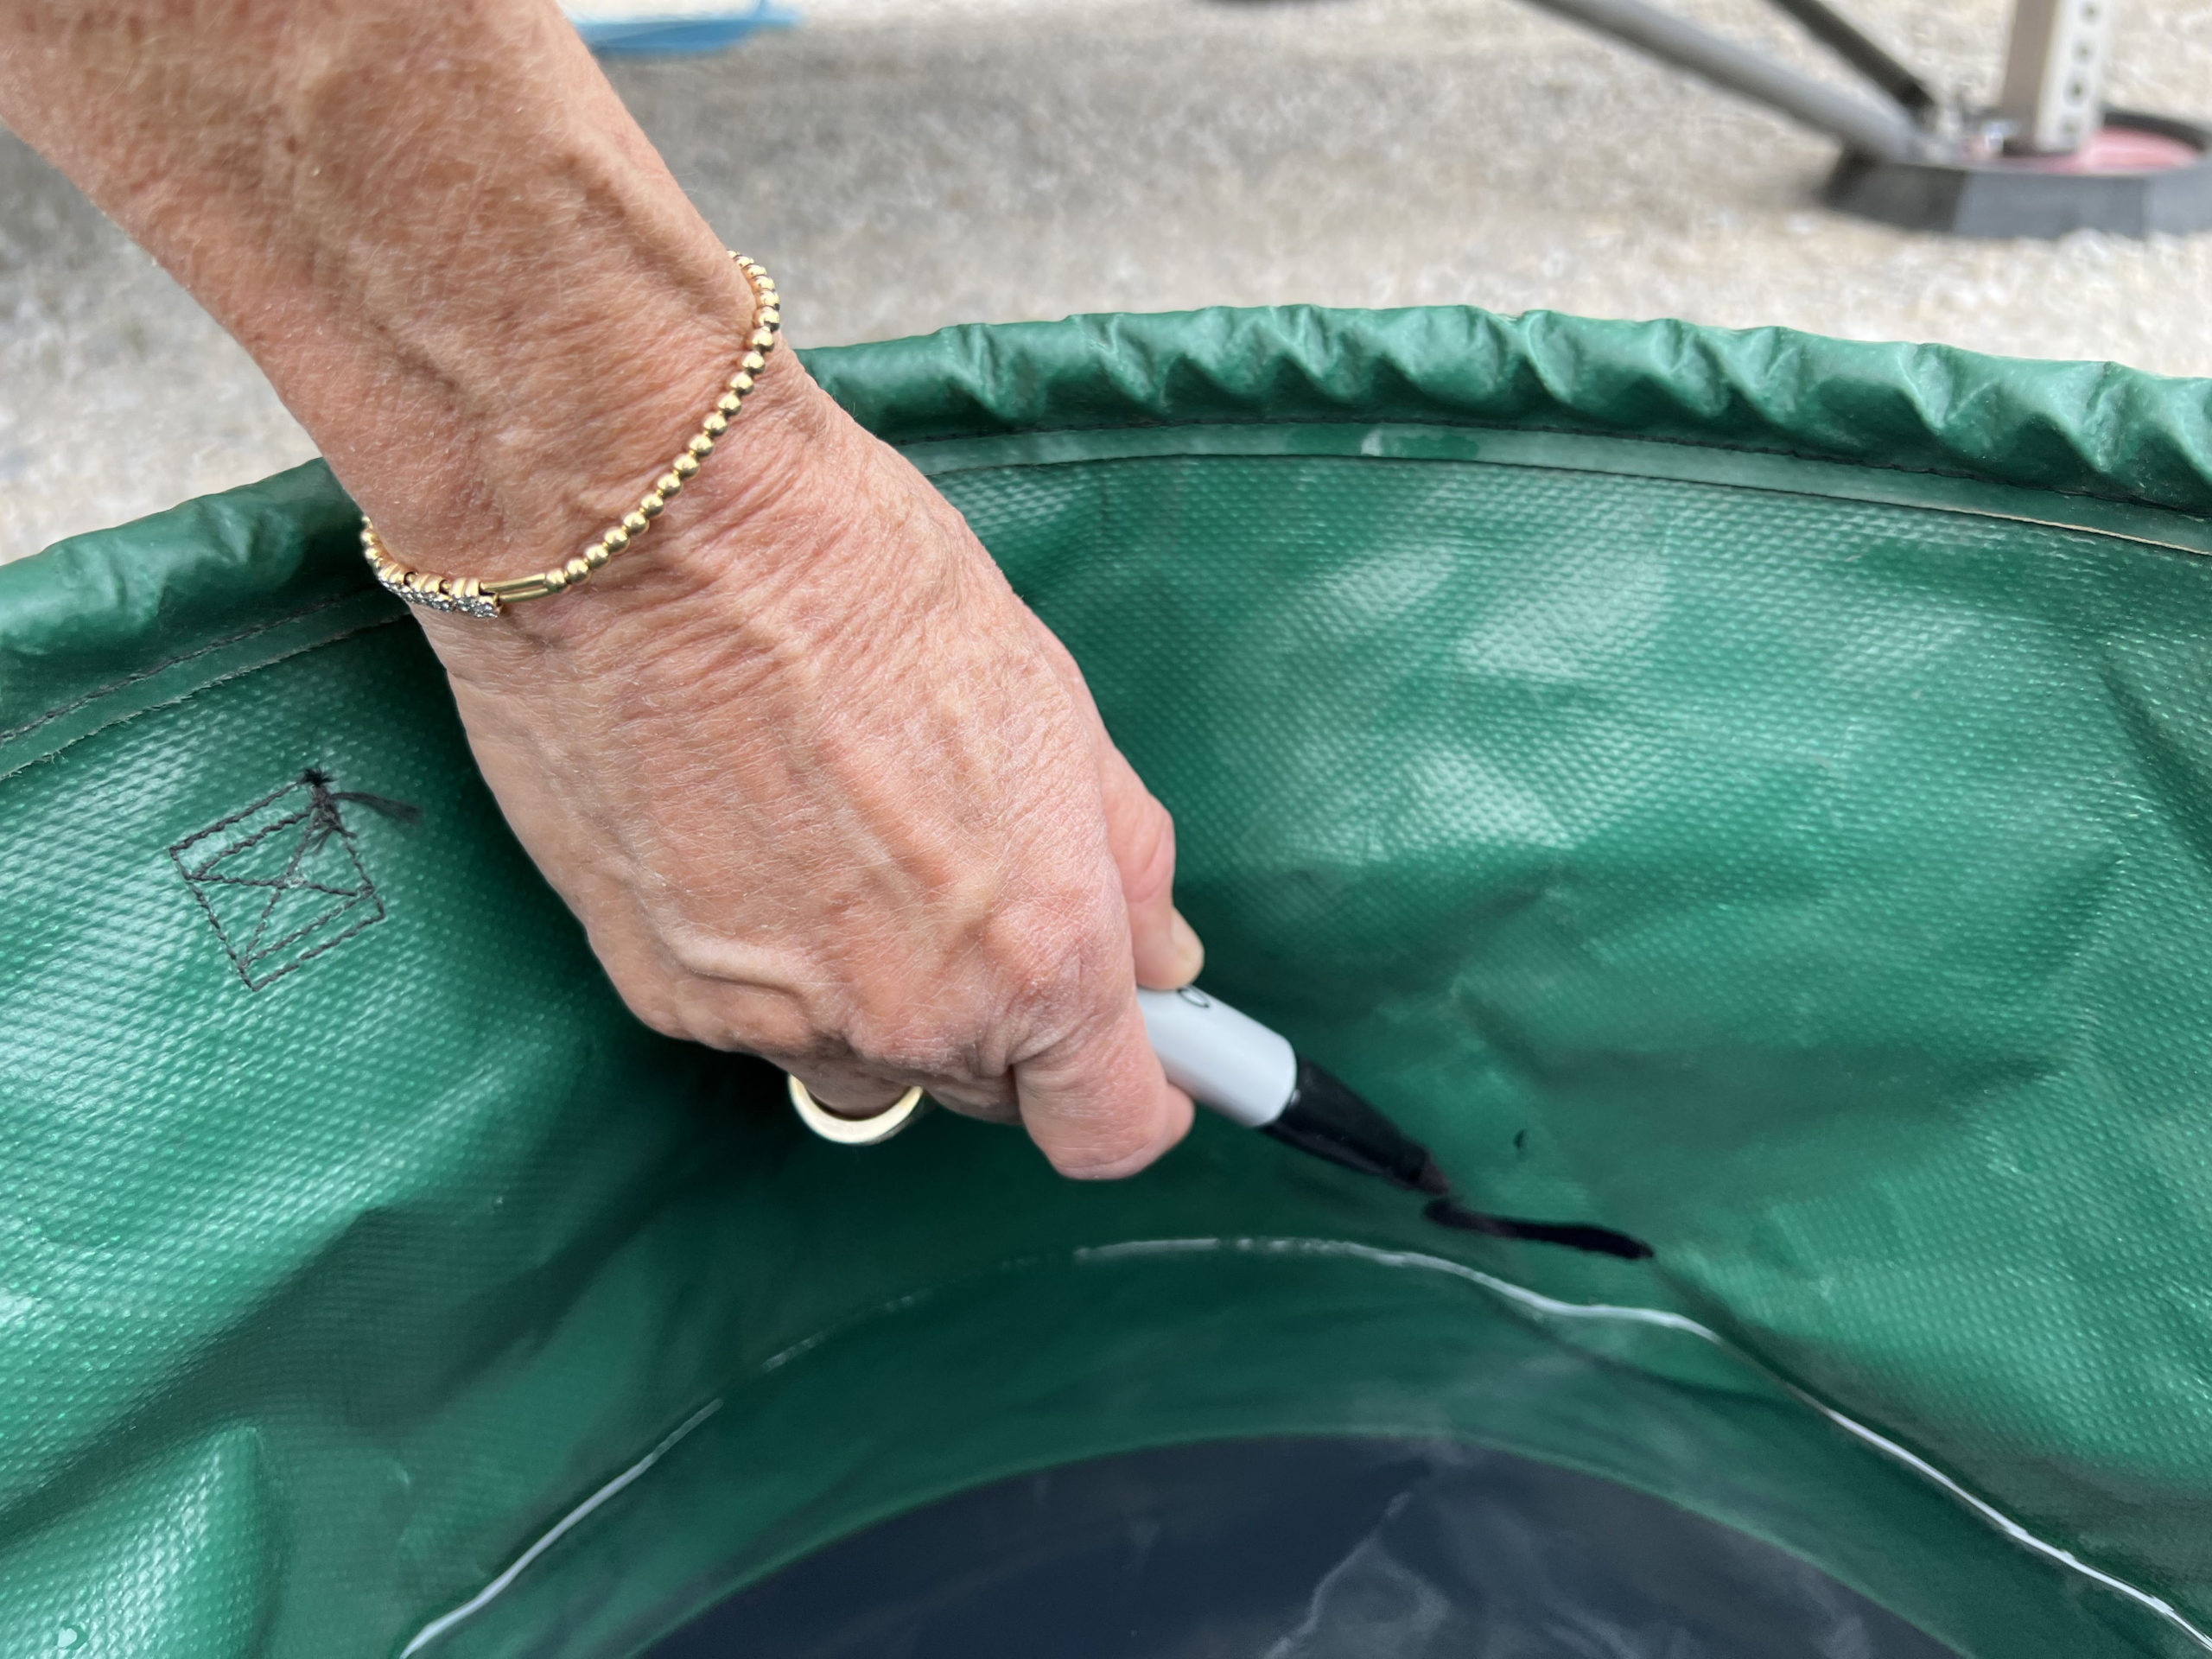 technician uses a sharpie to mark a fill line in the collapsible bucket